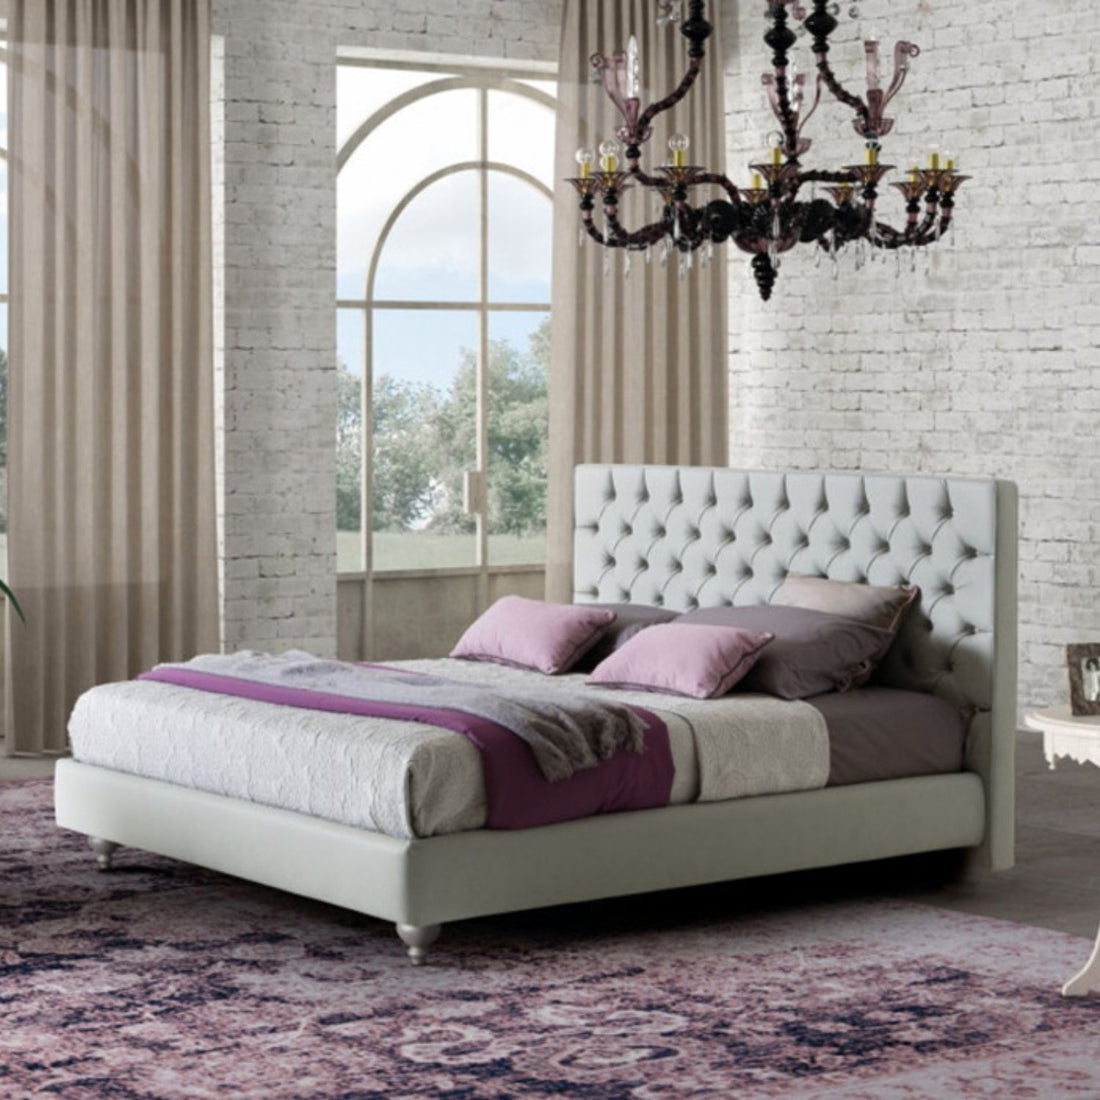 Have A Bedroom with Outstanding Furniture That You Have Always Dreamt Of!